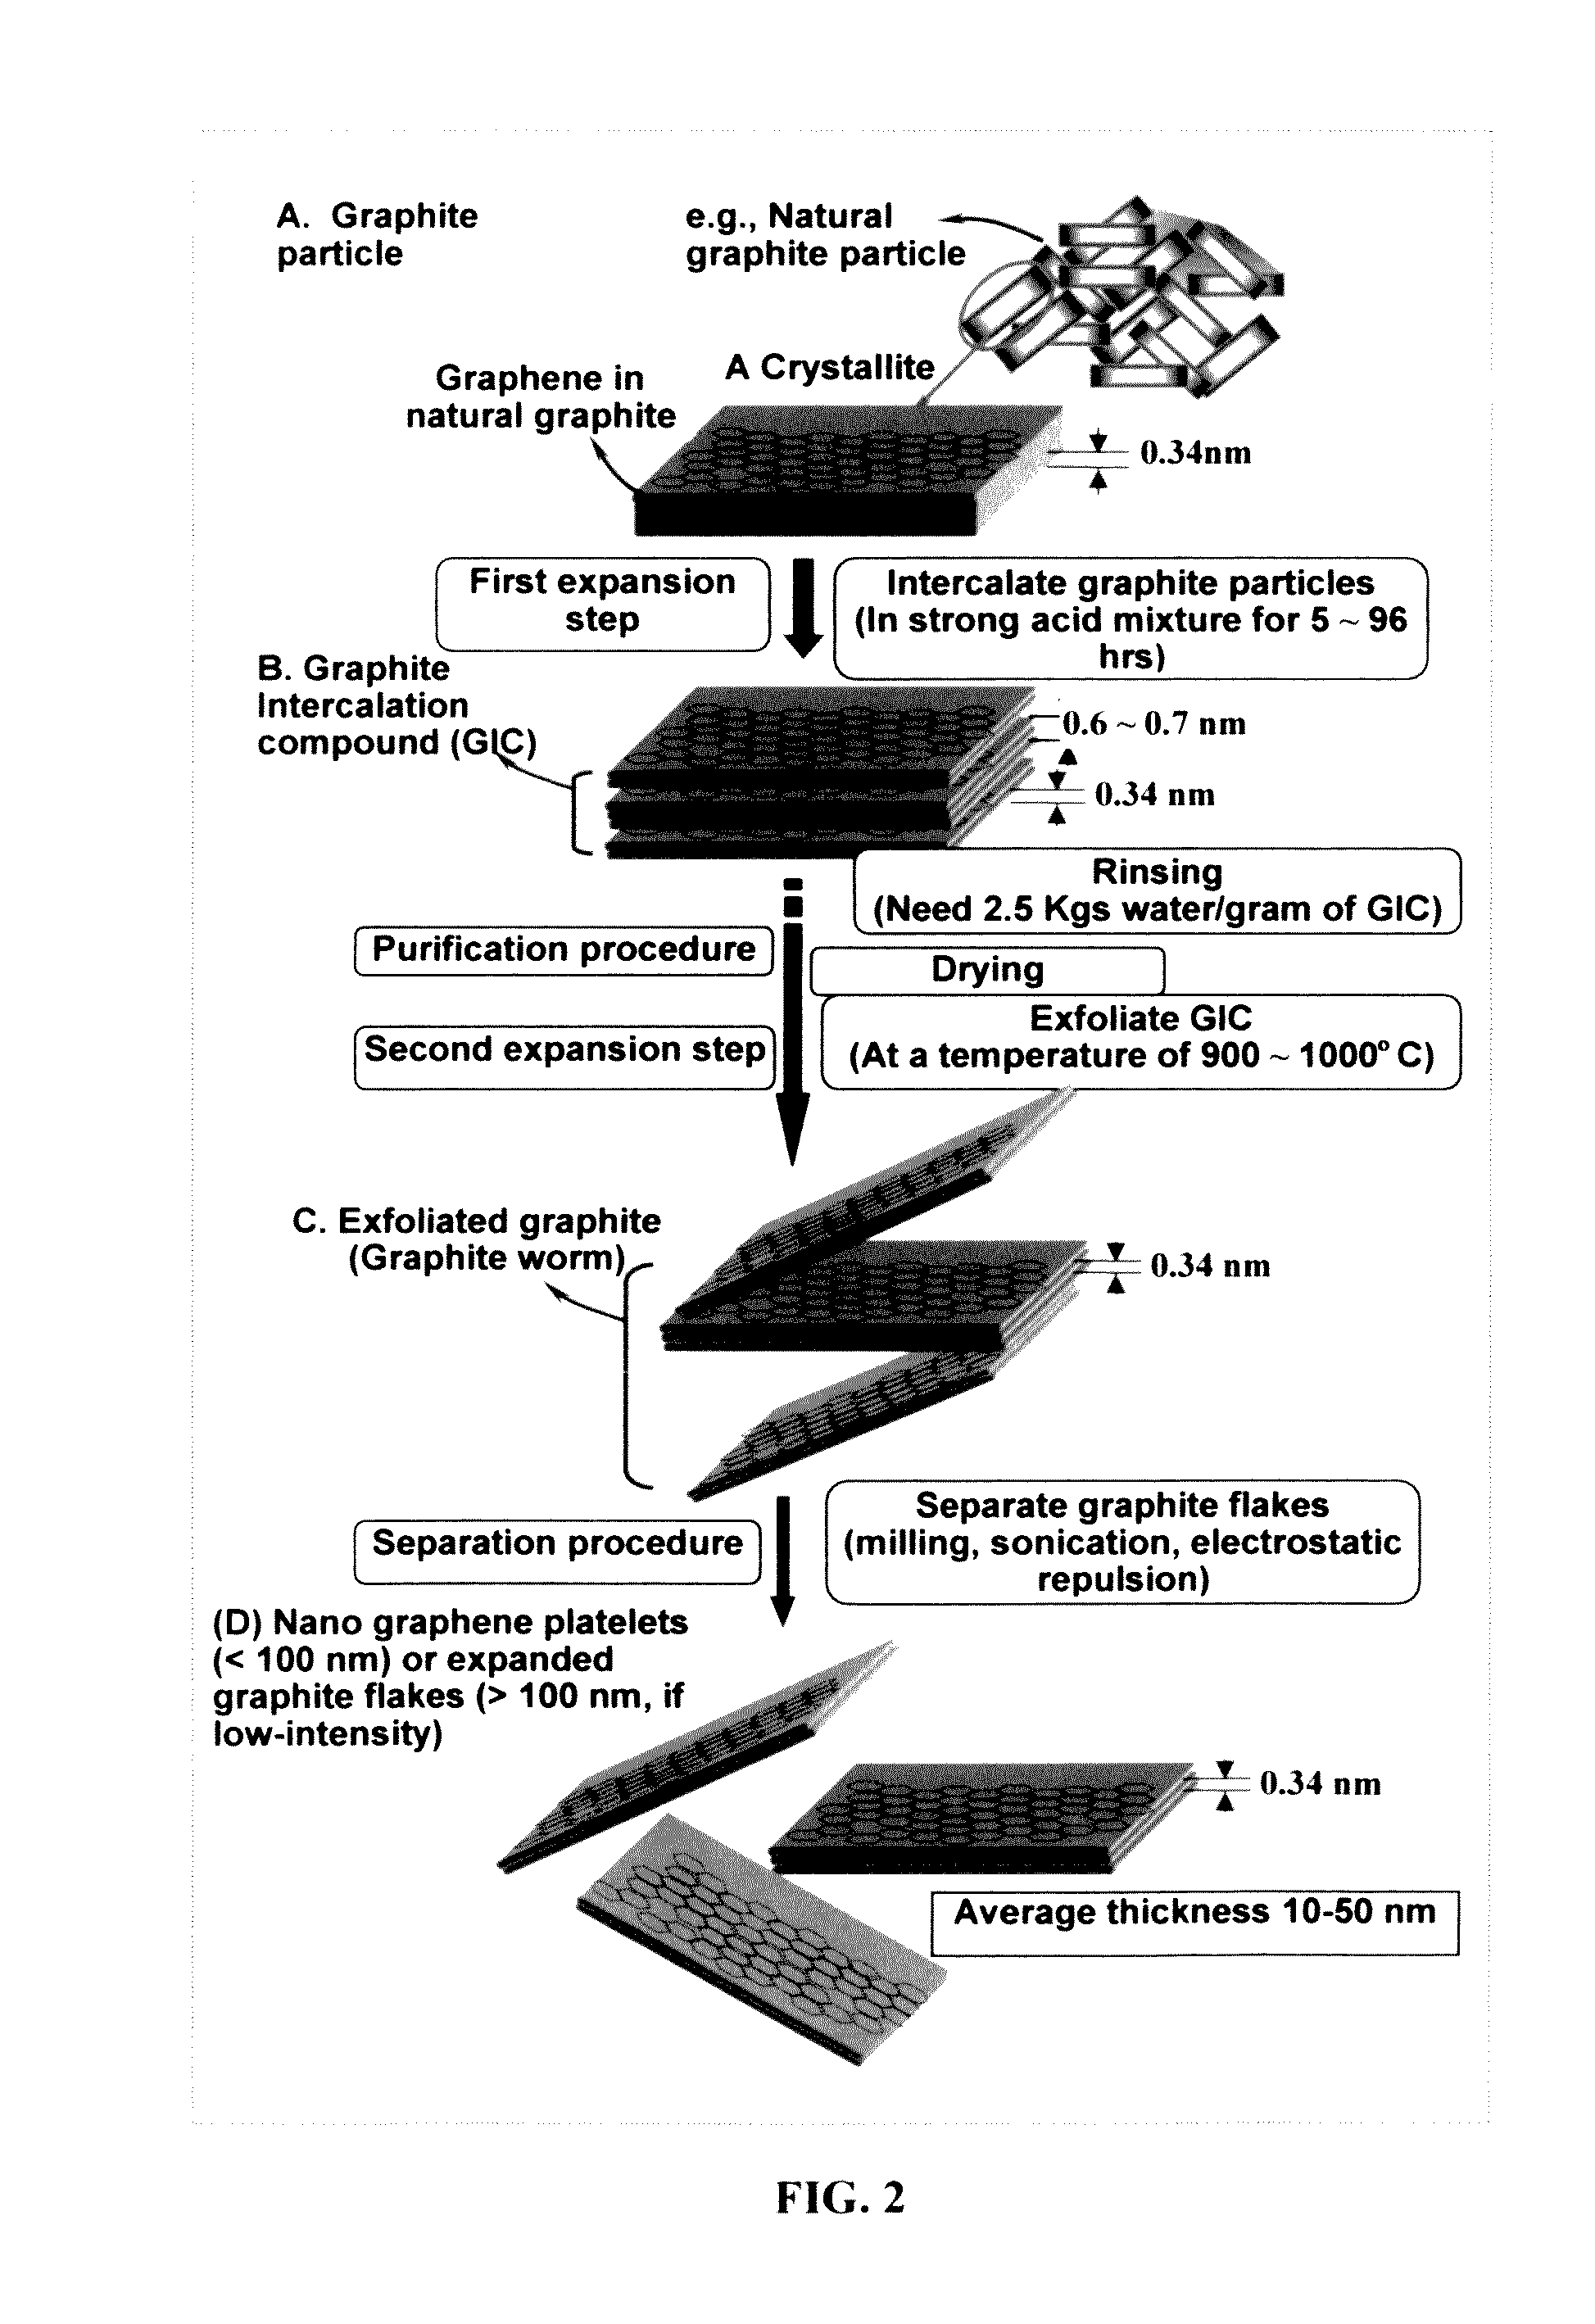 Alkali Metal Secondary Battery Containing a Carbon Matrix- or Carbon Matrix Composite-based Dendrite-Intercepting Layer